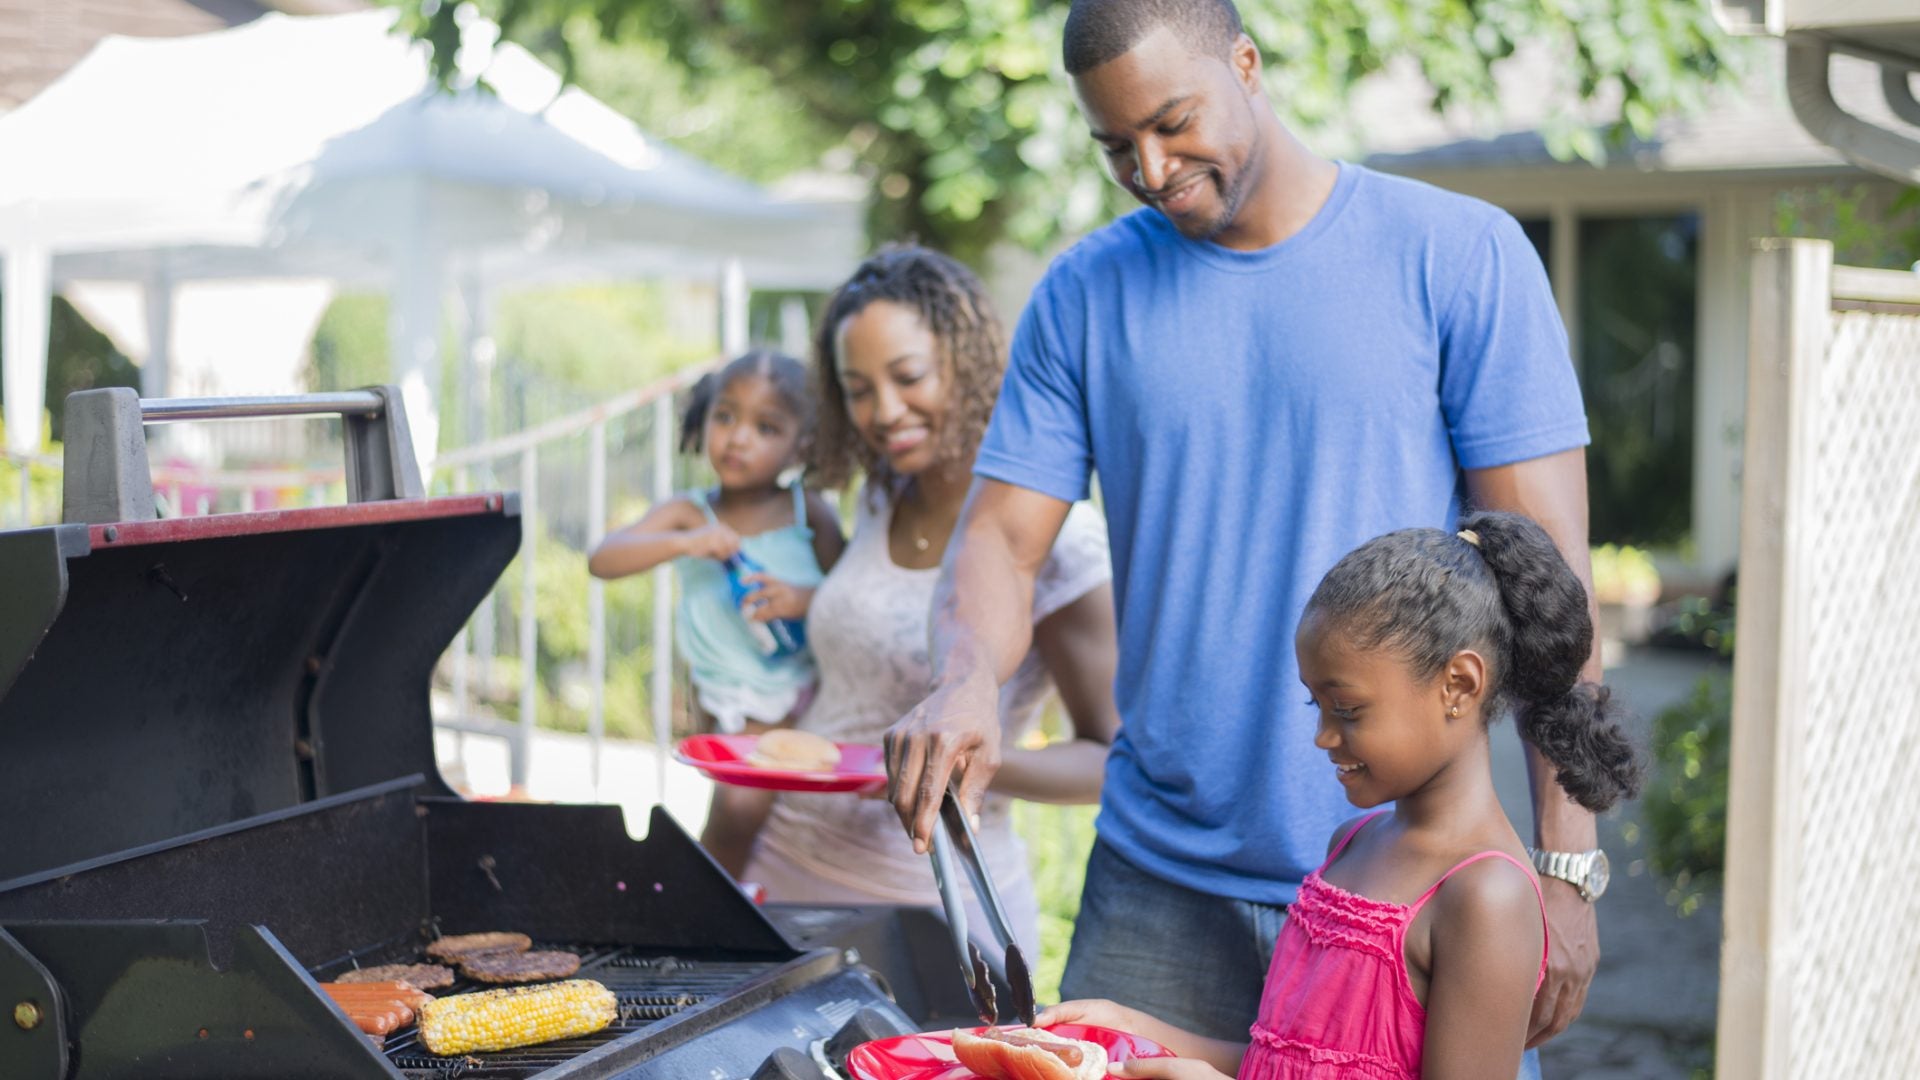 Top Five Conversations We Don't Want To Hear At The Juneteenth Cookout